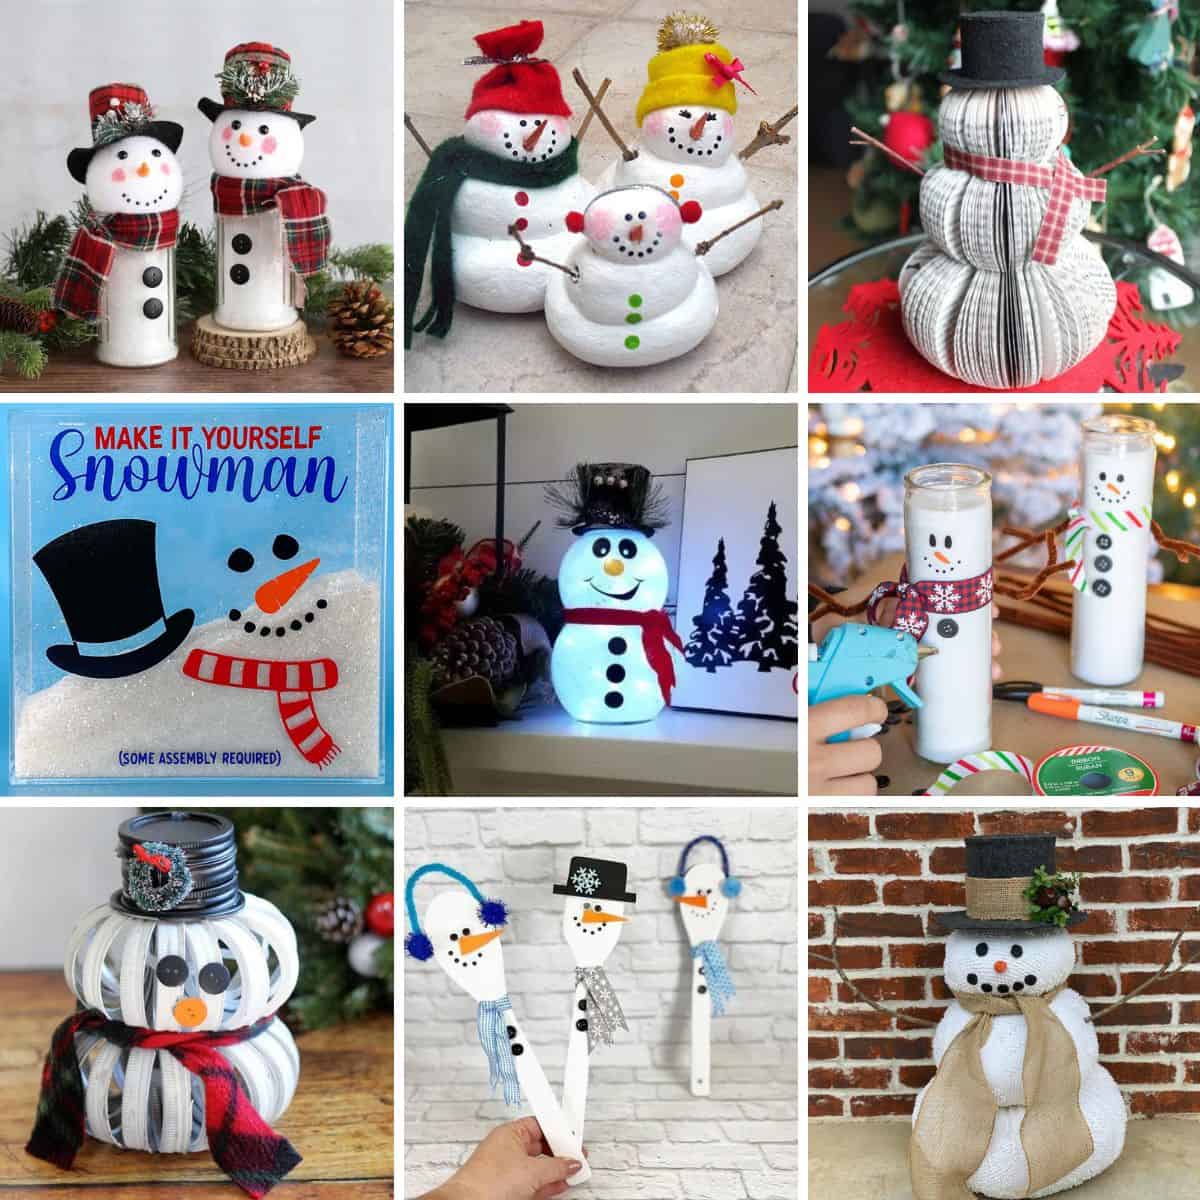 DIY Snowman Decorations: Create a Winter Wonderland with These Simple Crafts